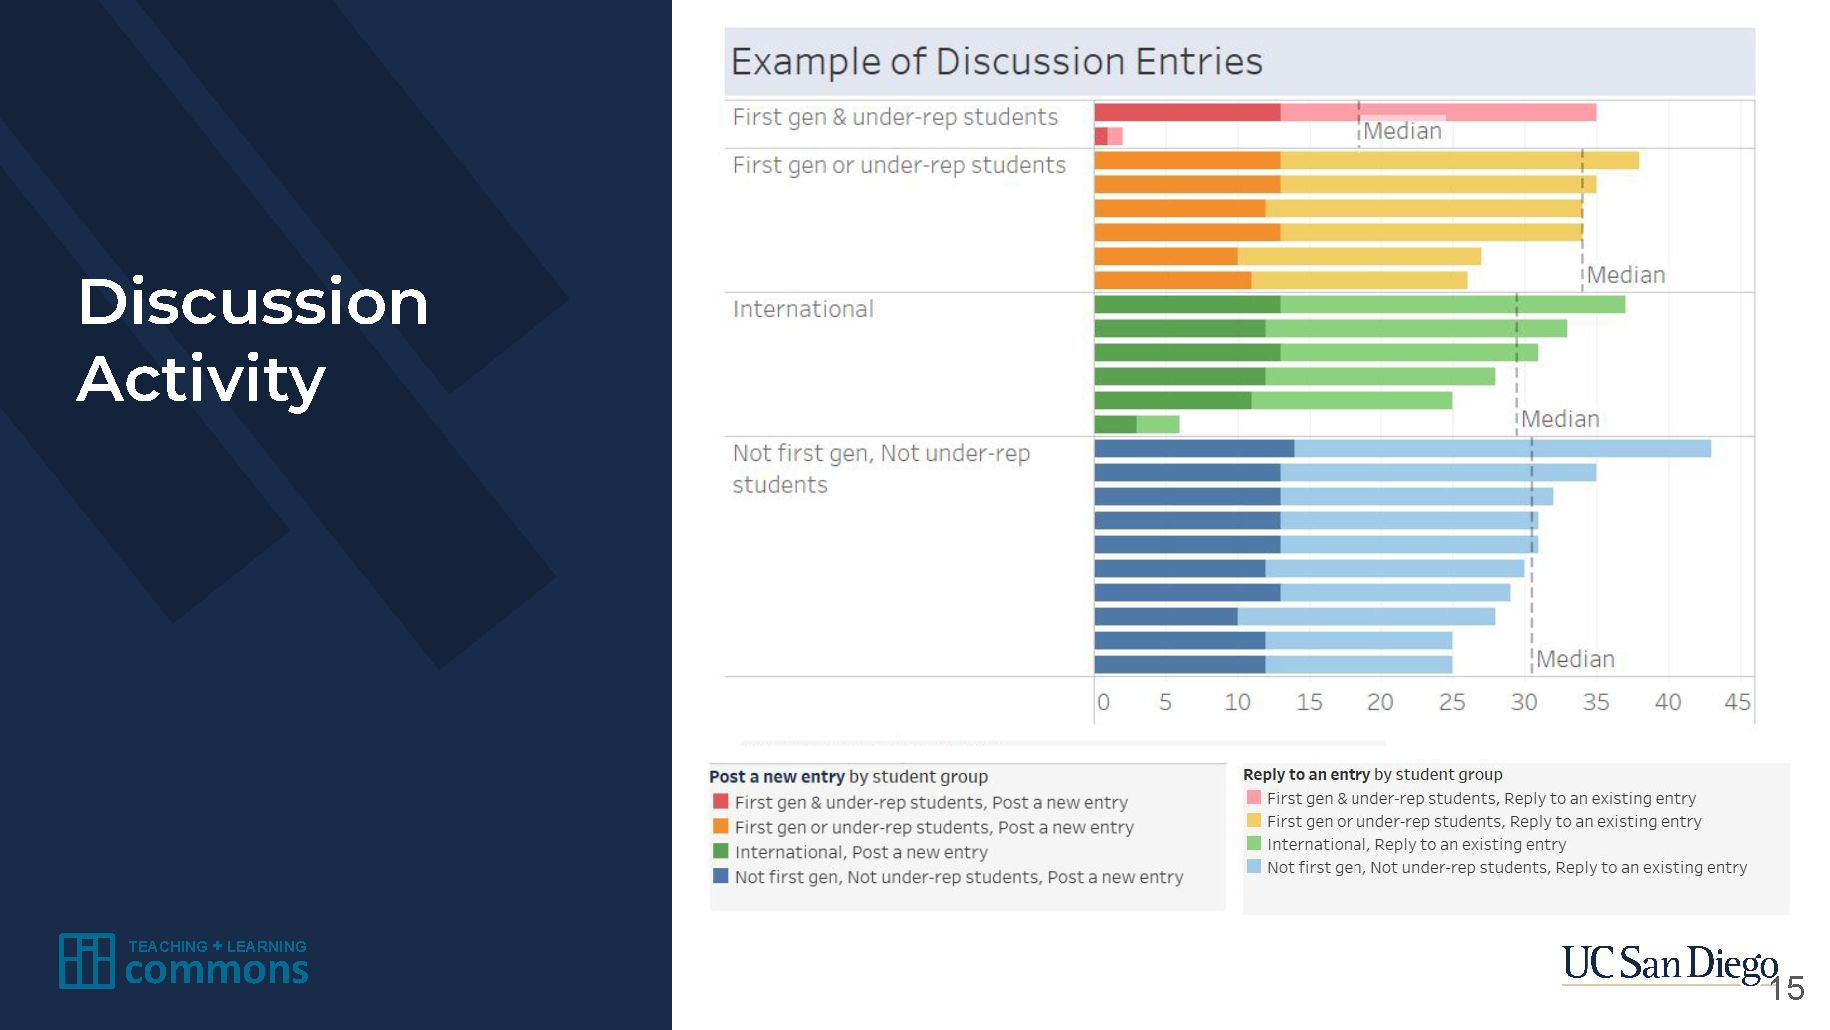 Discussion Entries by various student demographics